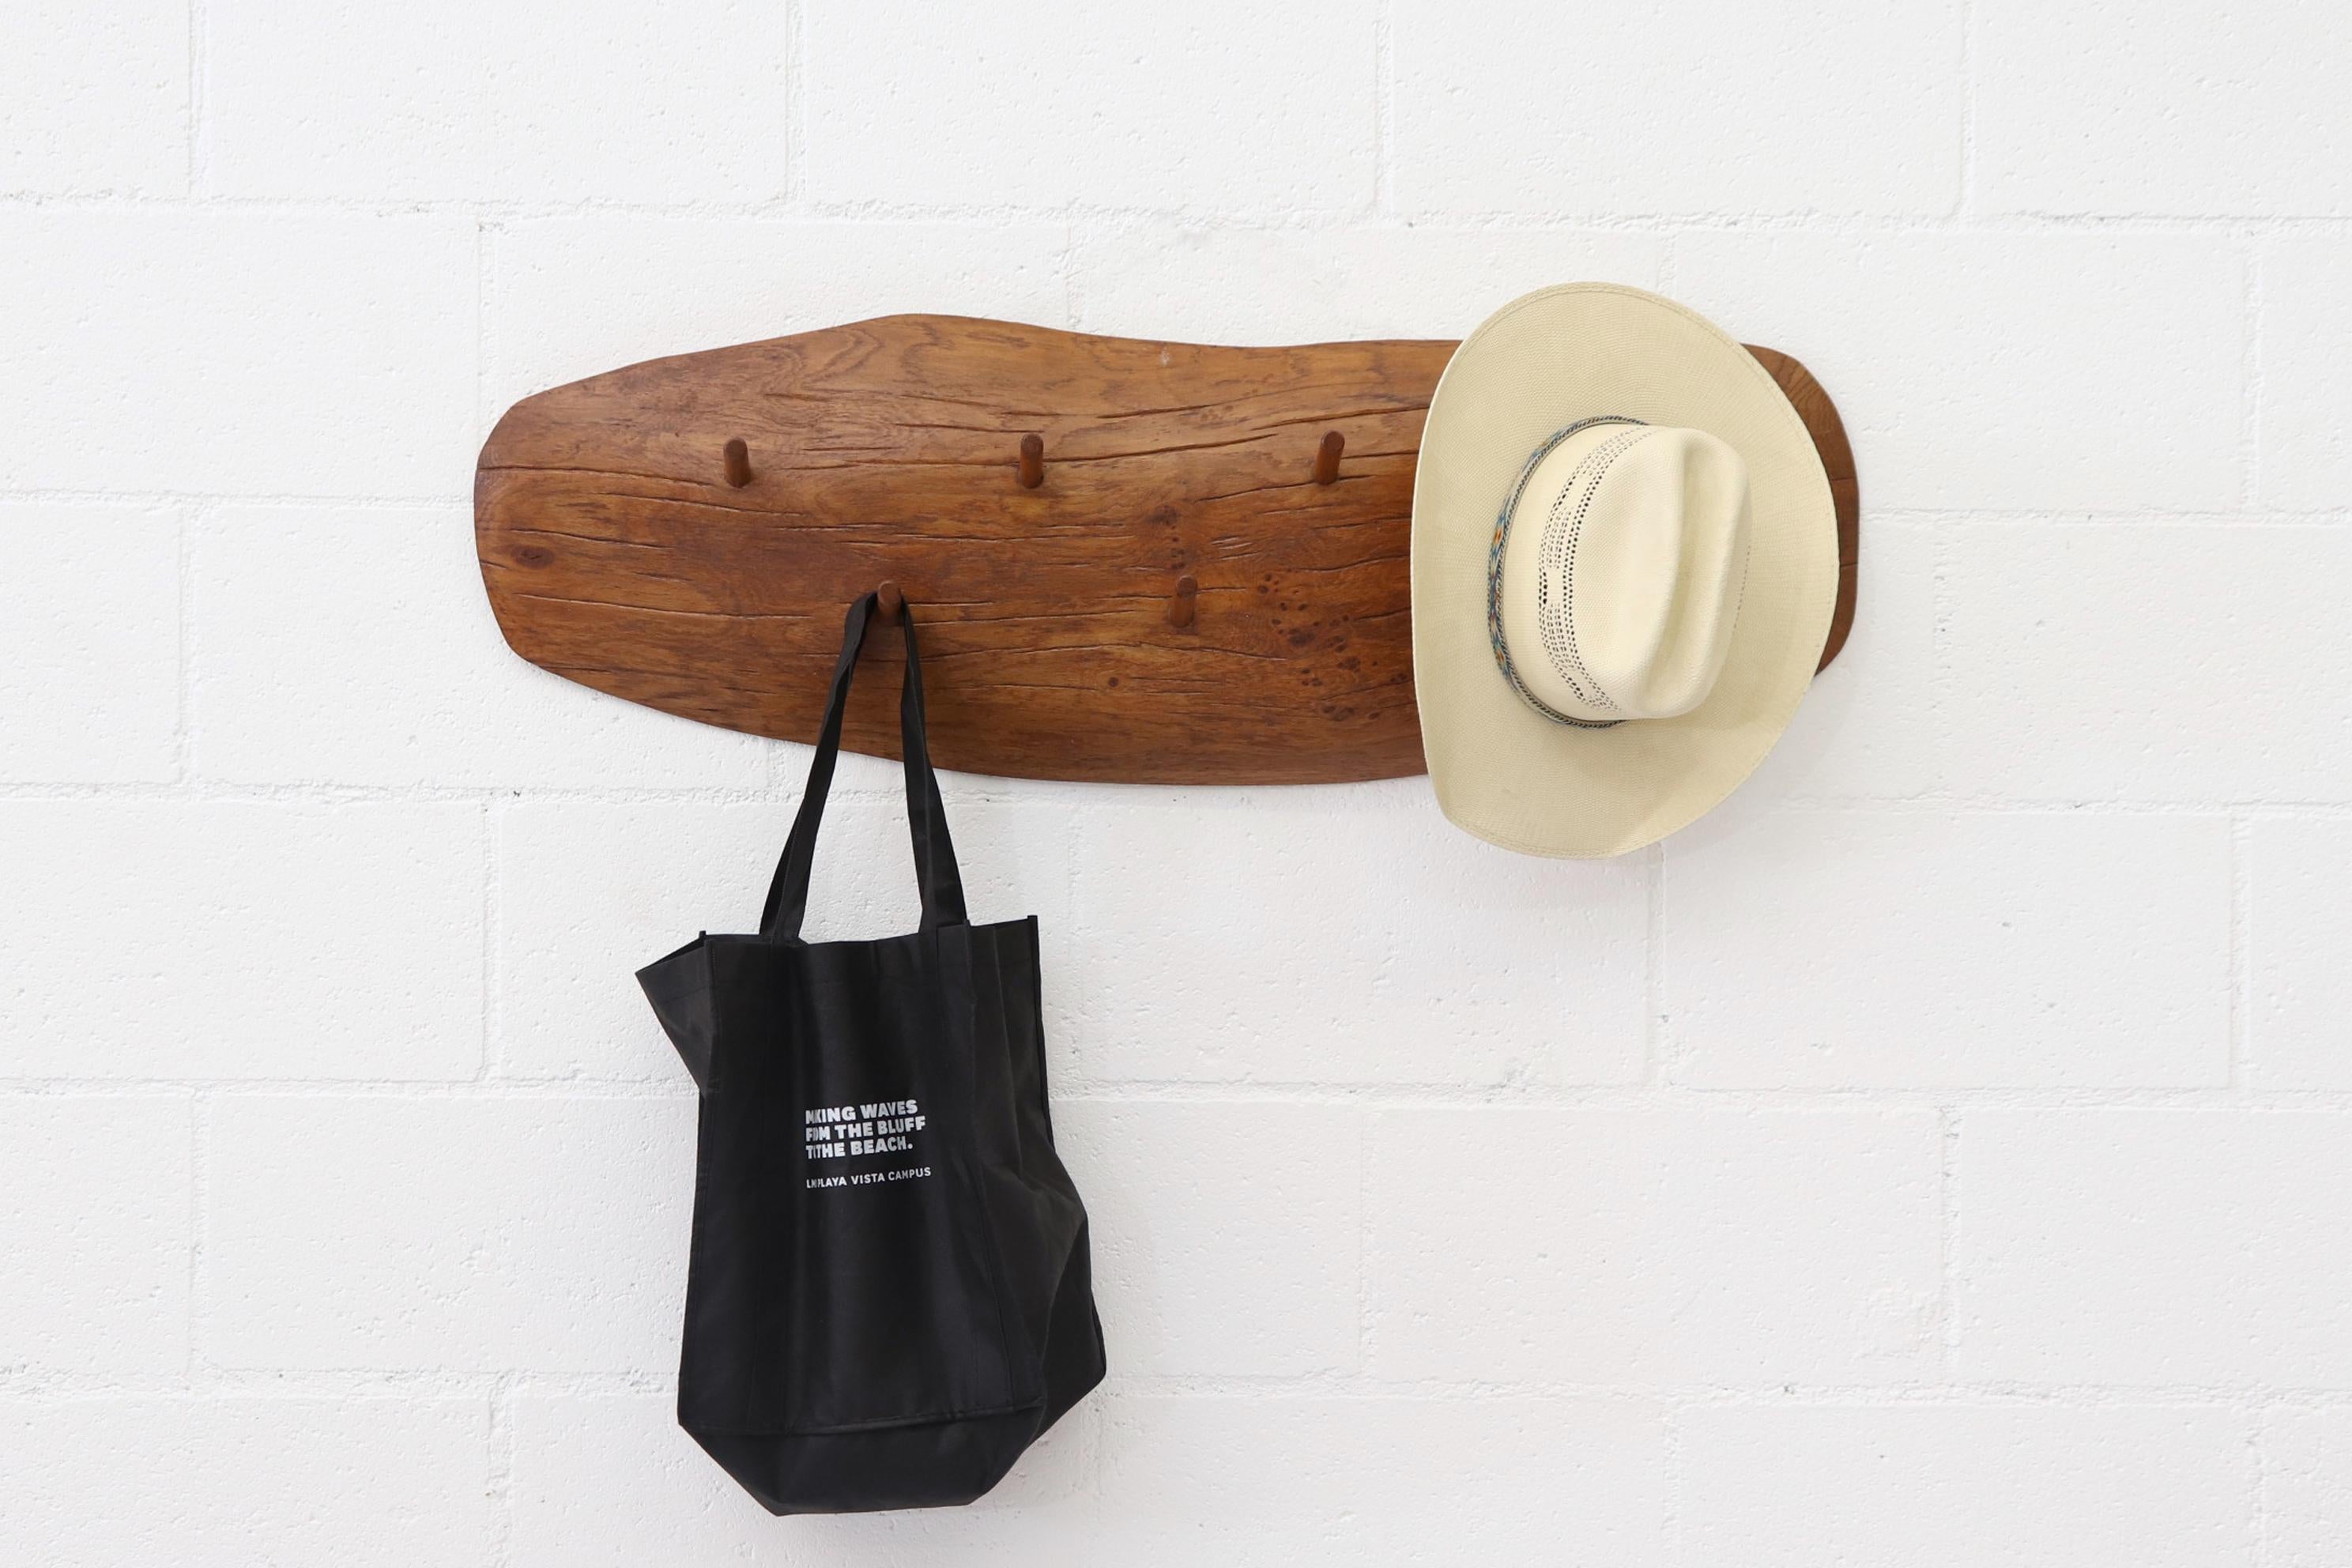 Brutalist wall-mounted natural wood coat or hat rack with 7 organically carved wood hooks. Space efficient with Rugged design and Rustic style. In original condition with minimal wear consistent with age.